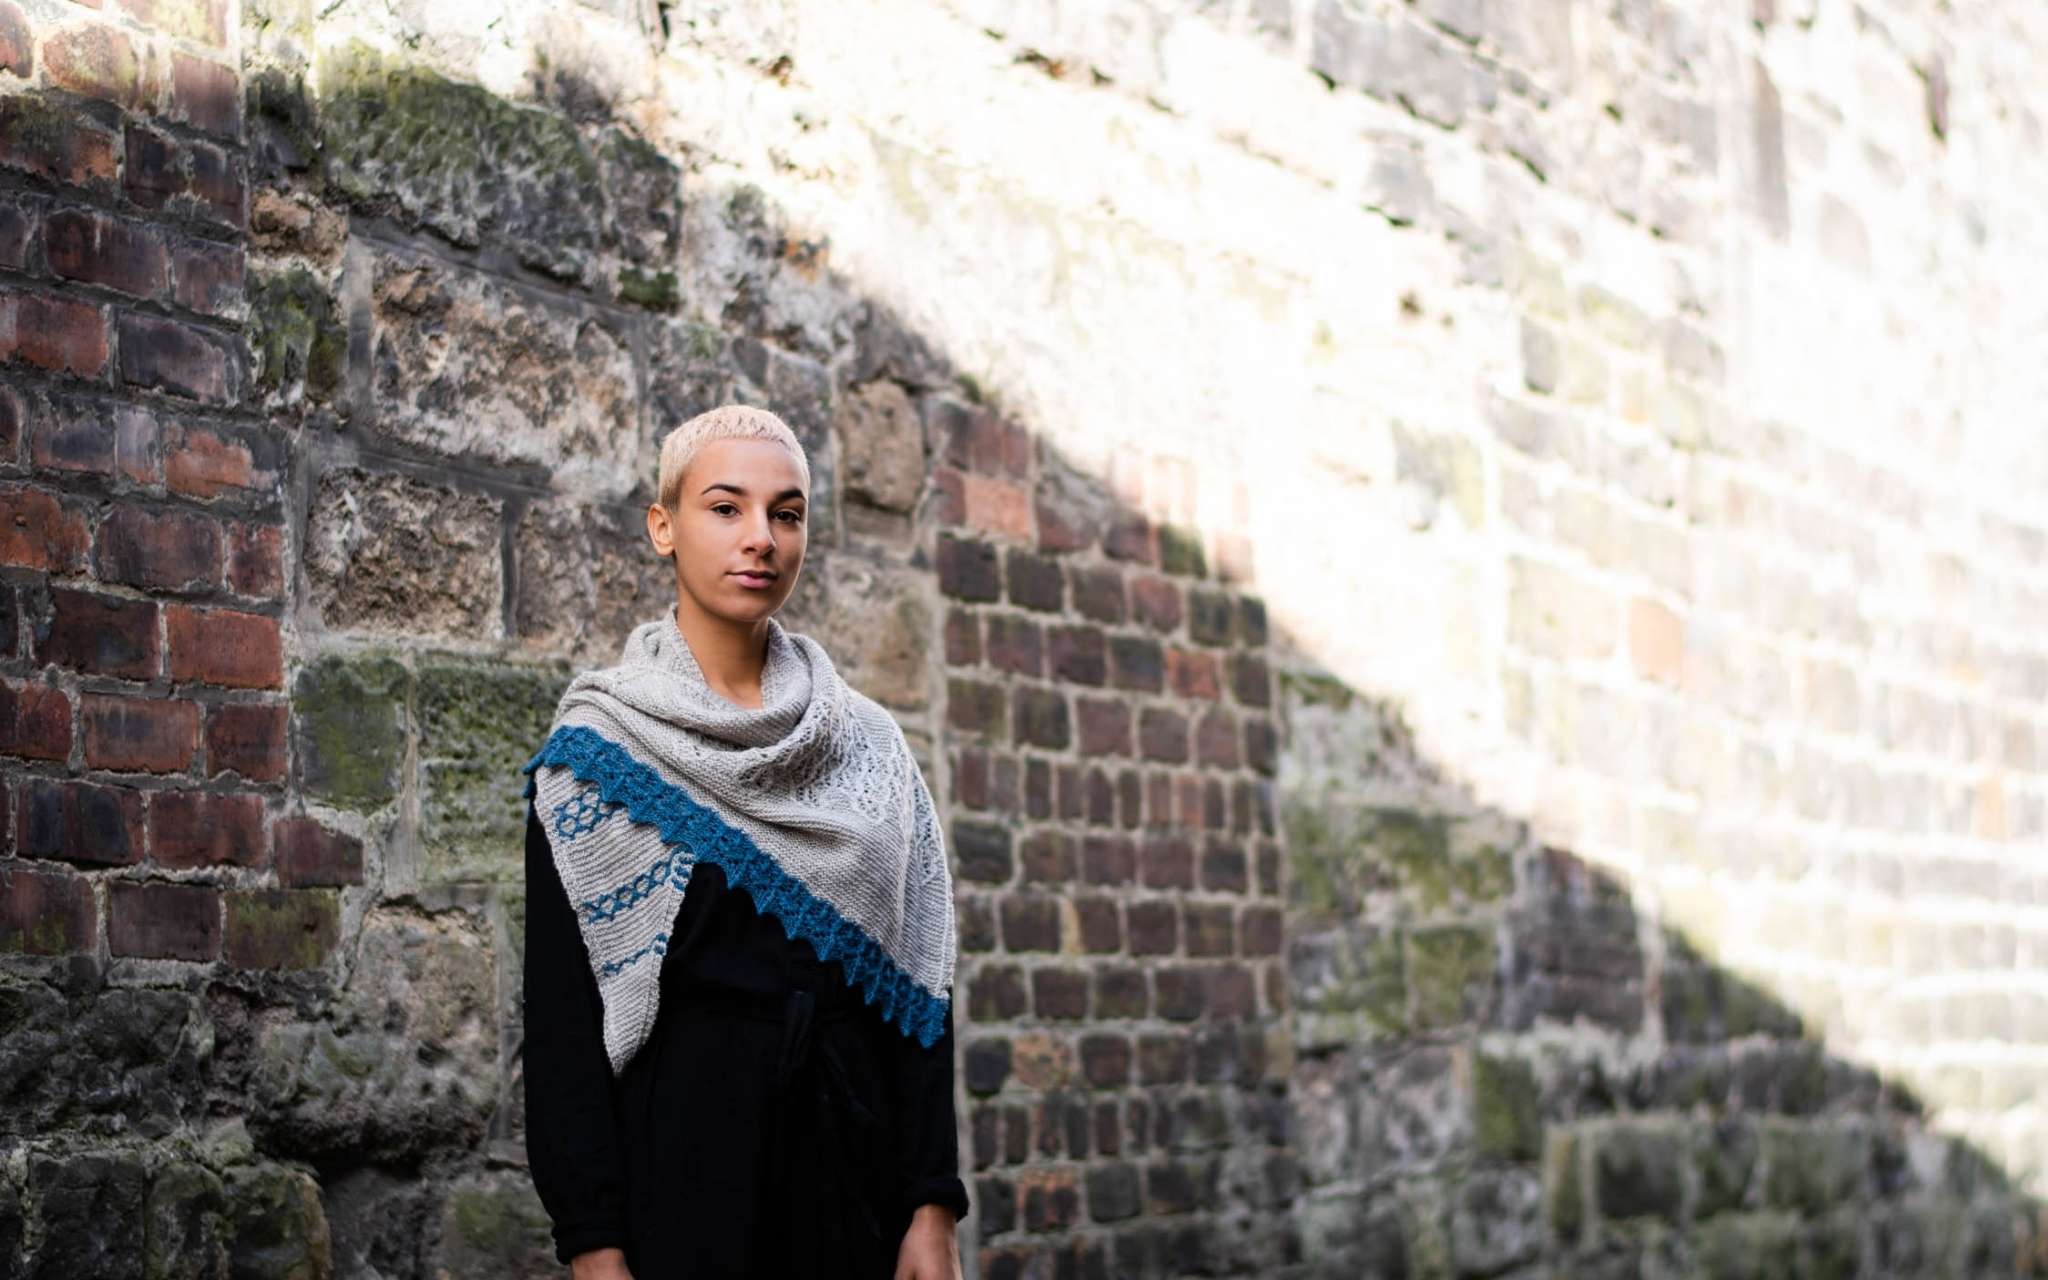 A model with short pale hair stands against a brick wall in the bright sunshine. They are wearing dark clothes, and a pale grey shawl with blue contrast edging is around their neck.